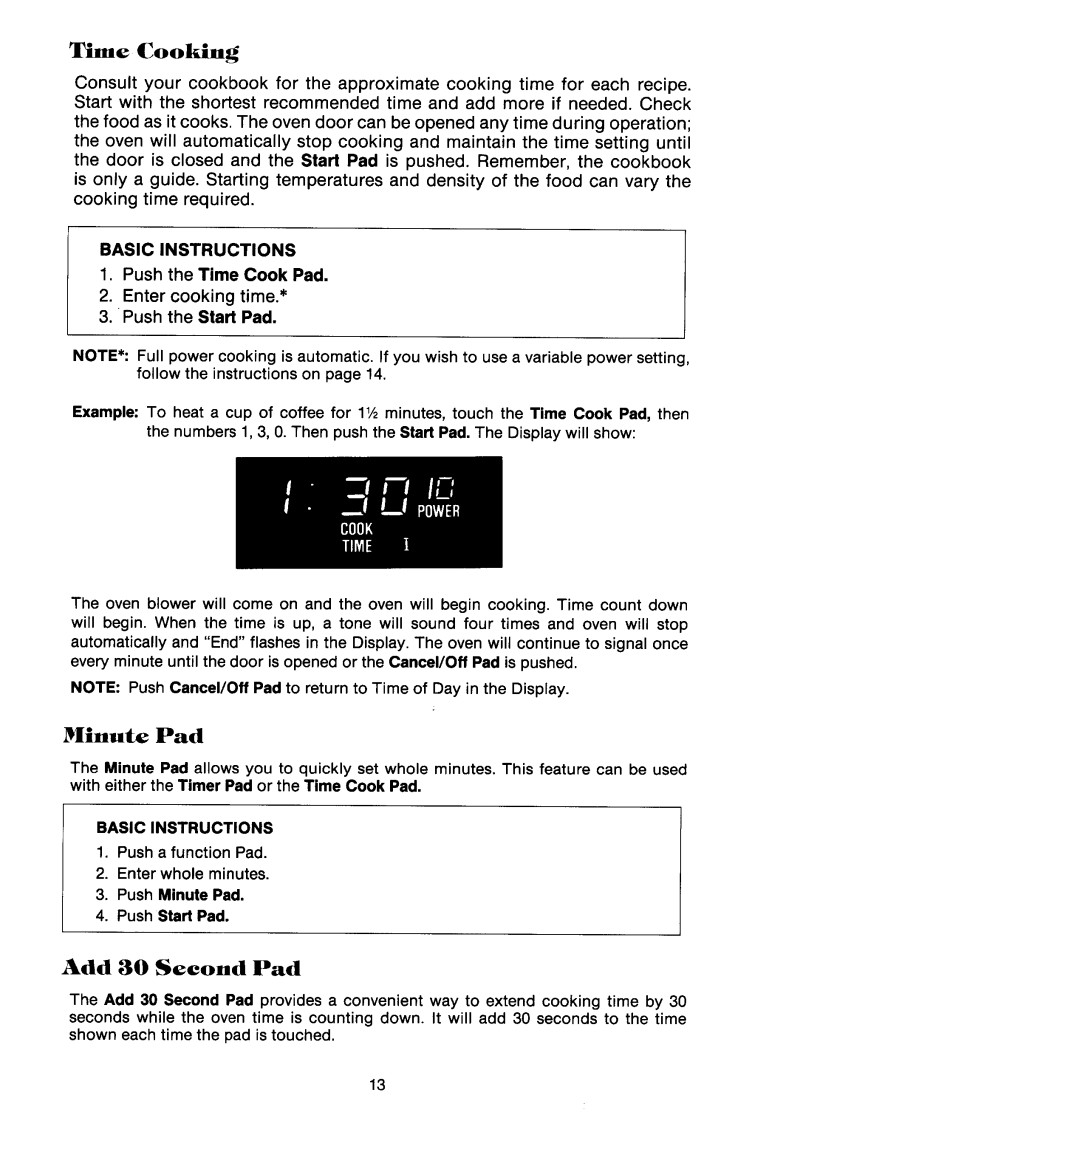 Jenn-Air M438, M418 manual Time Cooking, BASIC INSTRUCTIONS 1.Push the Time Cook Pad 